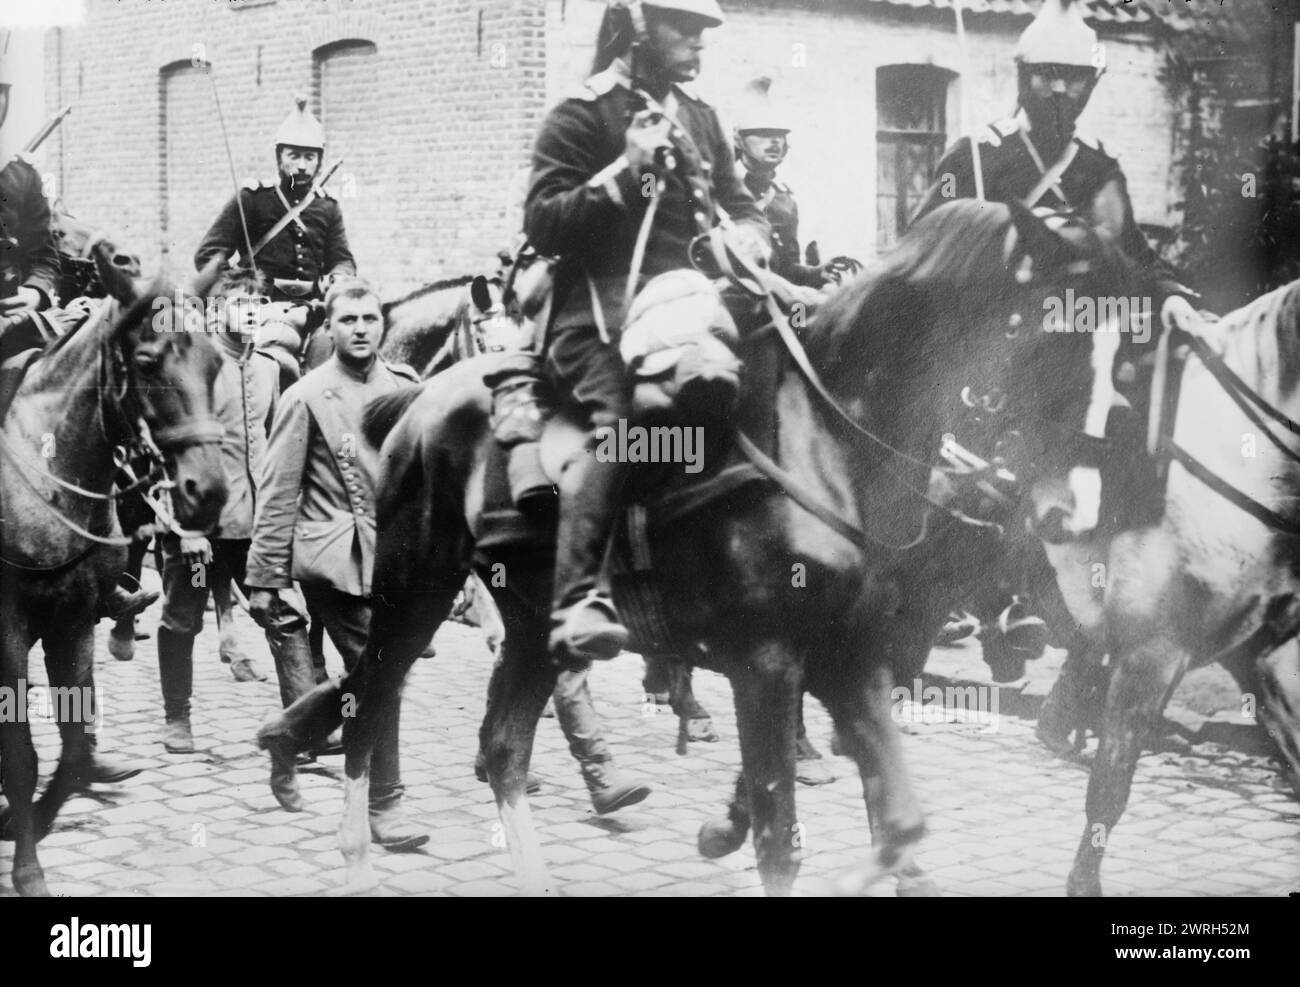 Uhlan prisoners at Guelzin, between c1914 and c1915. Possibly Polish prisoners of war surrounded by the French calvary during World War I. Stock Photo